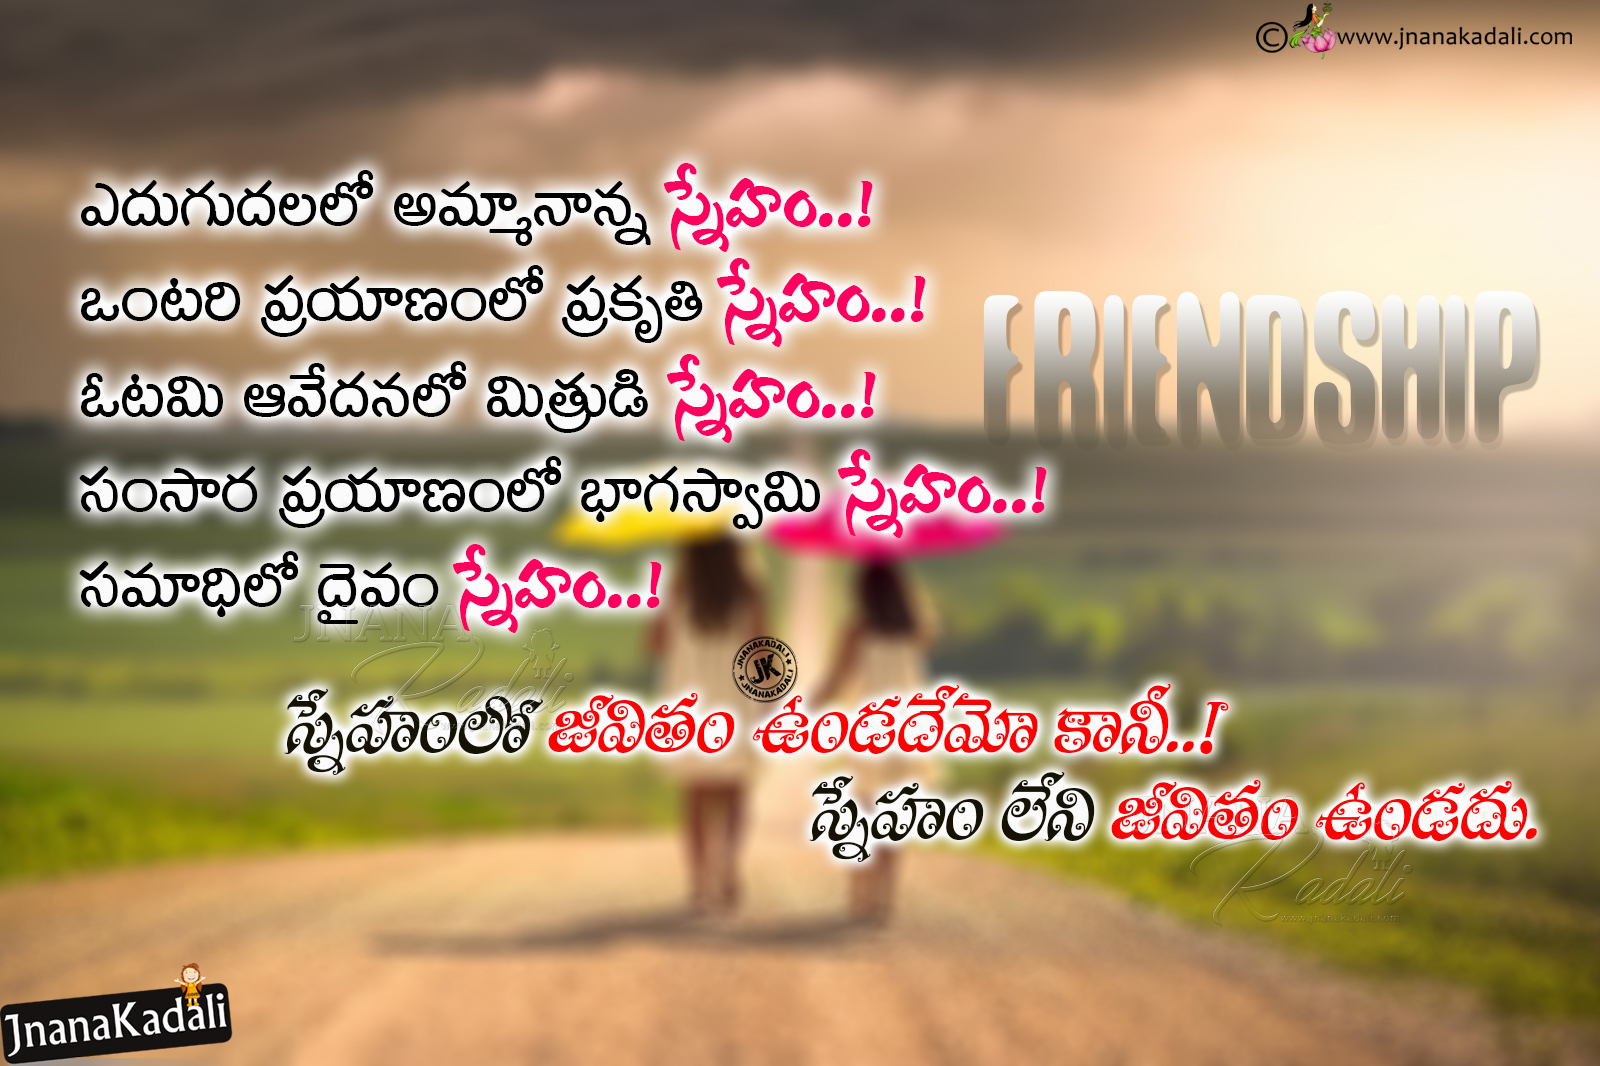 Latest best Telugu Friendship Heart Touching Quotes with Cute Friends